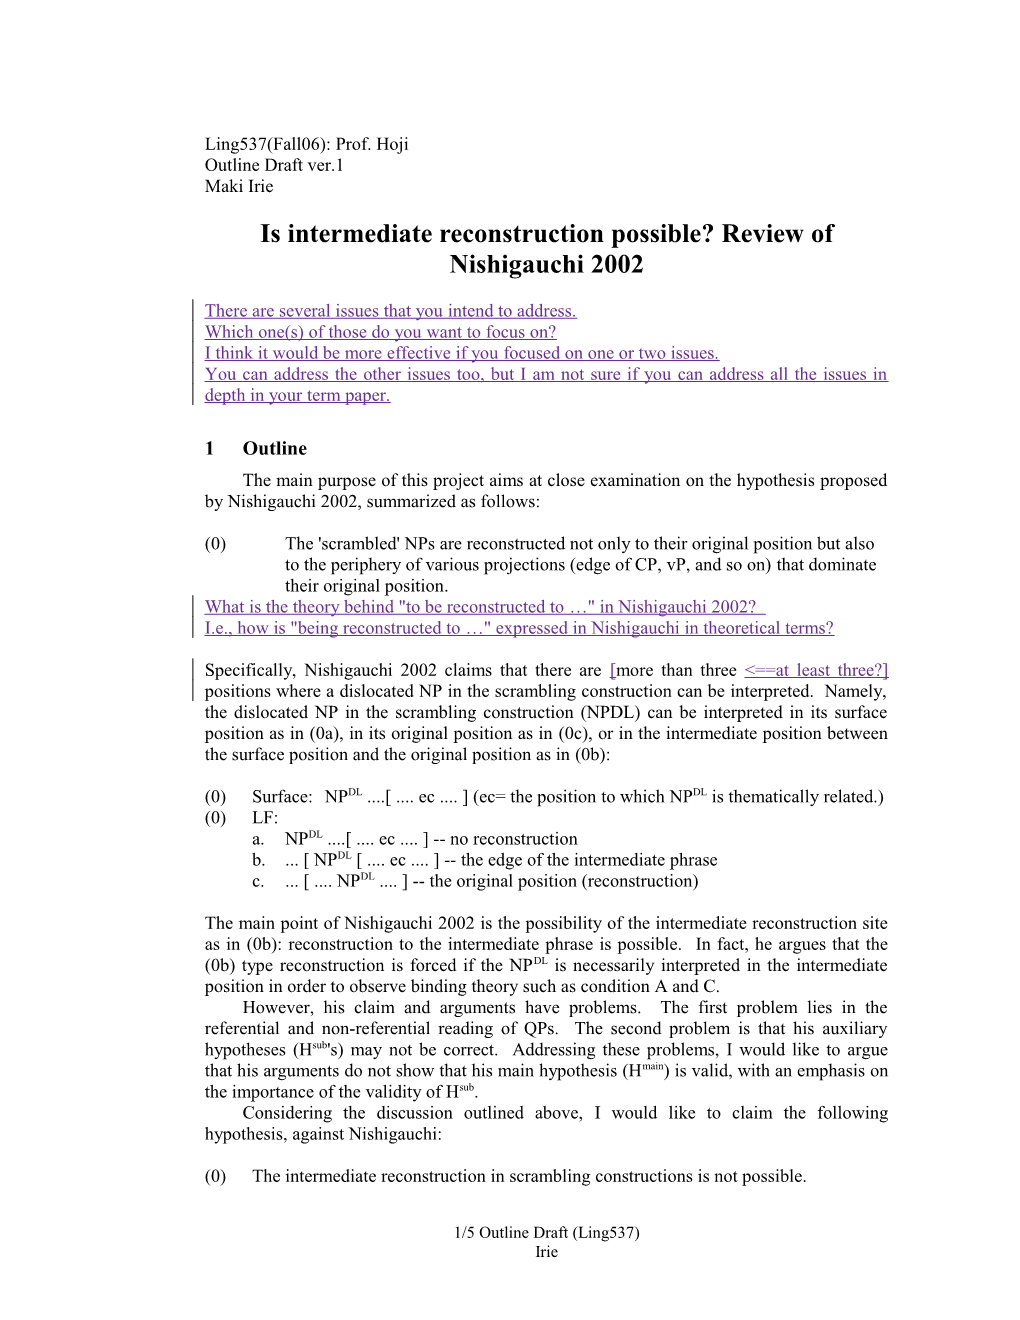 Is Intermediate Reconstruction Possible? Review of Nishigauchi 2002